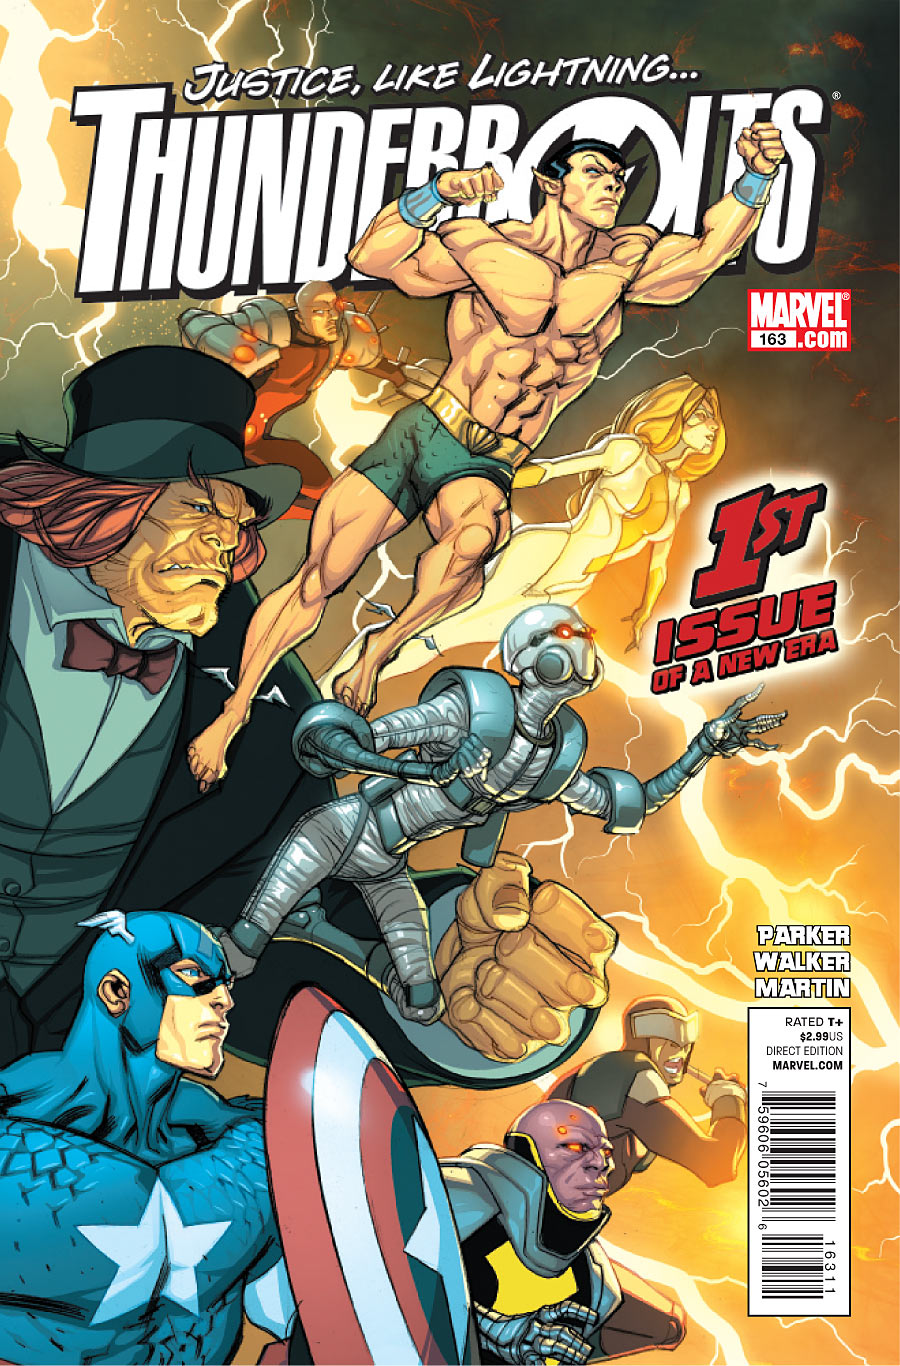 REVIEW: Thunderbolts #163